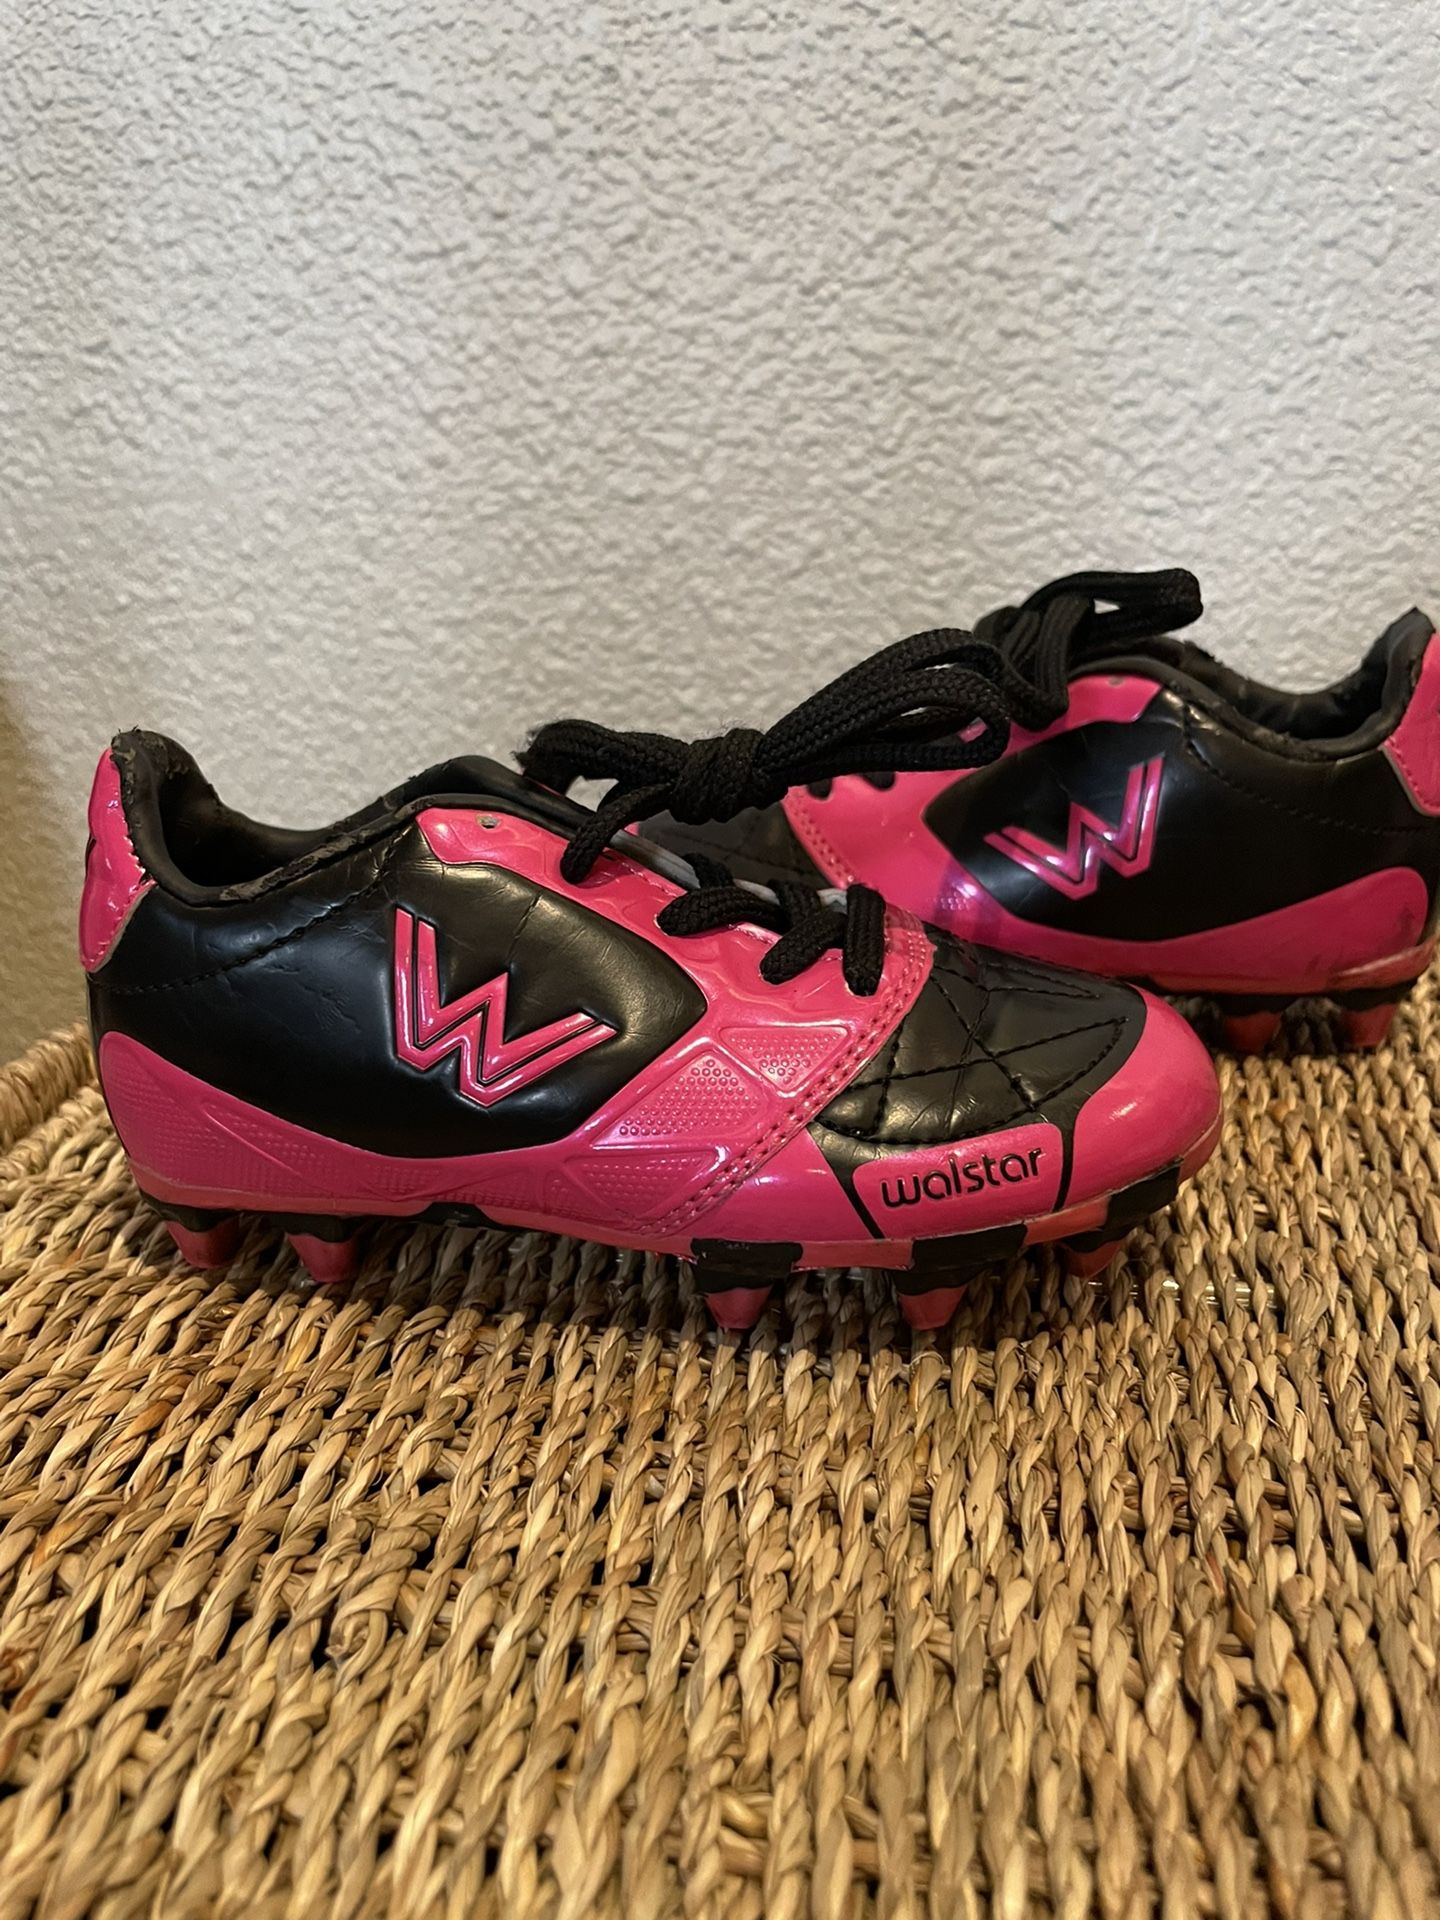 Walstar cleats / Size 8 